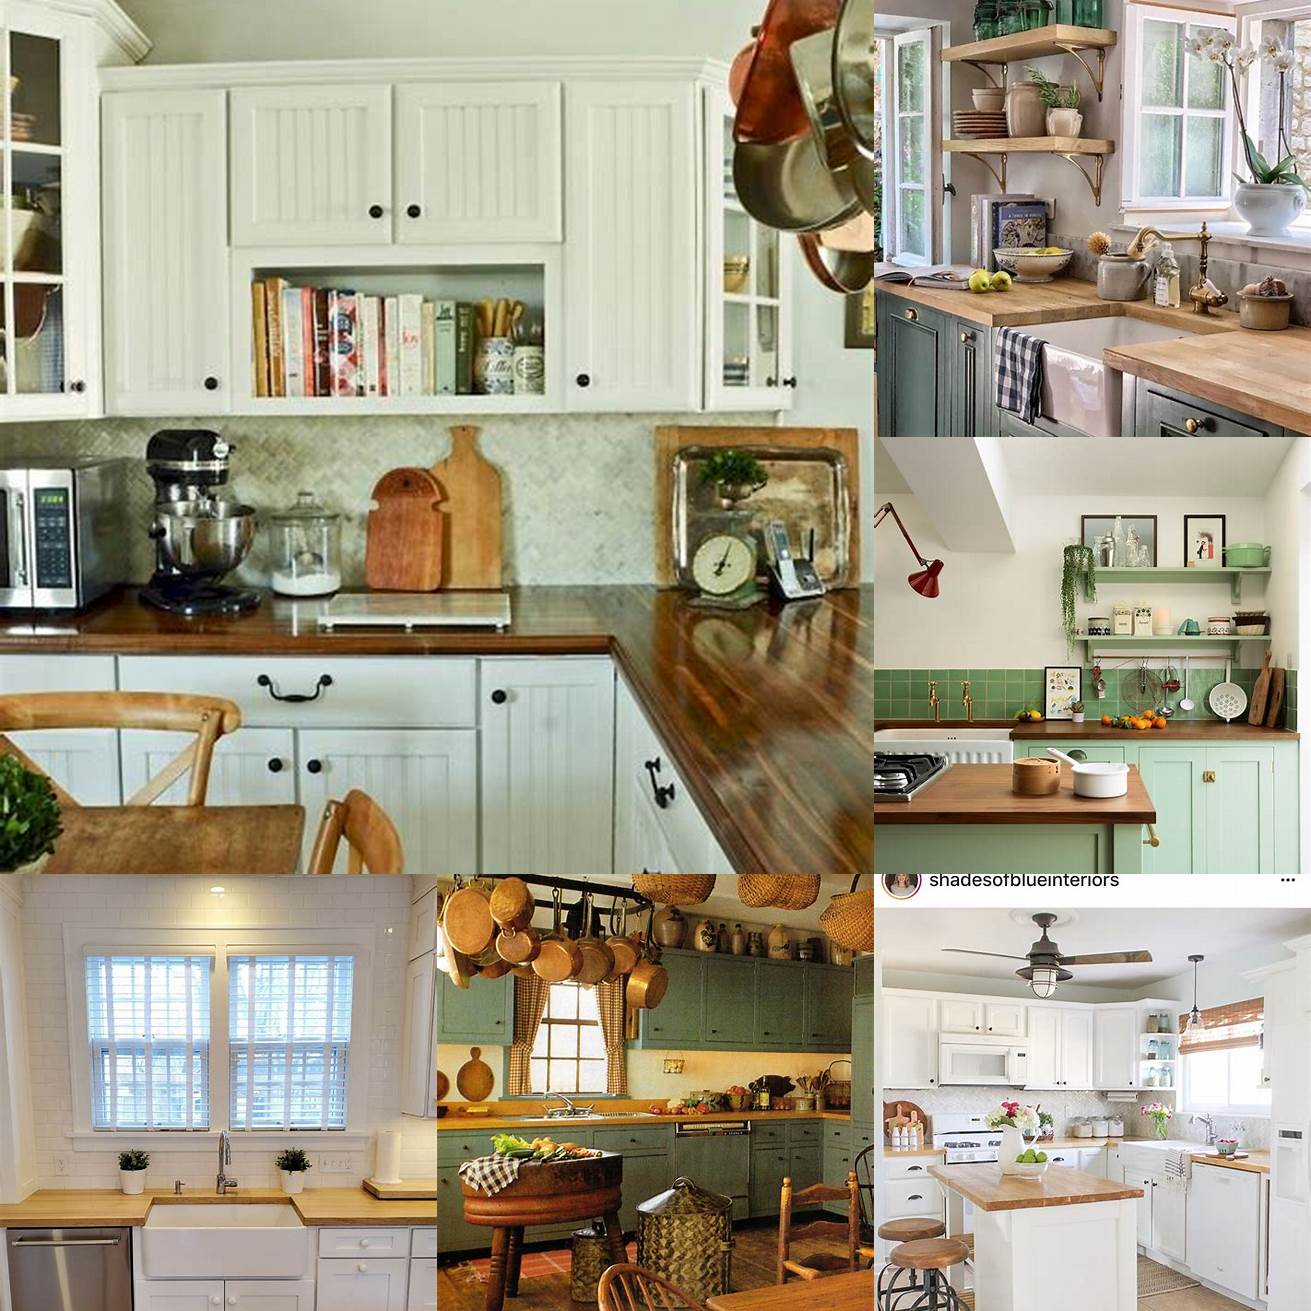 4 Cozy Cottage - A compact kitchen with wooden cabinets a butcher block countertop and vintage-style appliances The floral wallpaper and ceramic dishes add a touch of whimsy